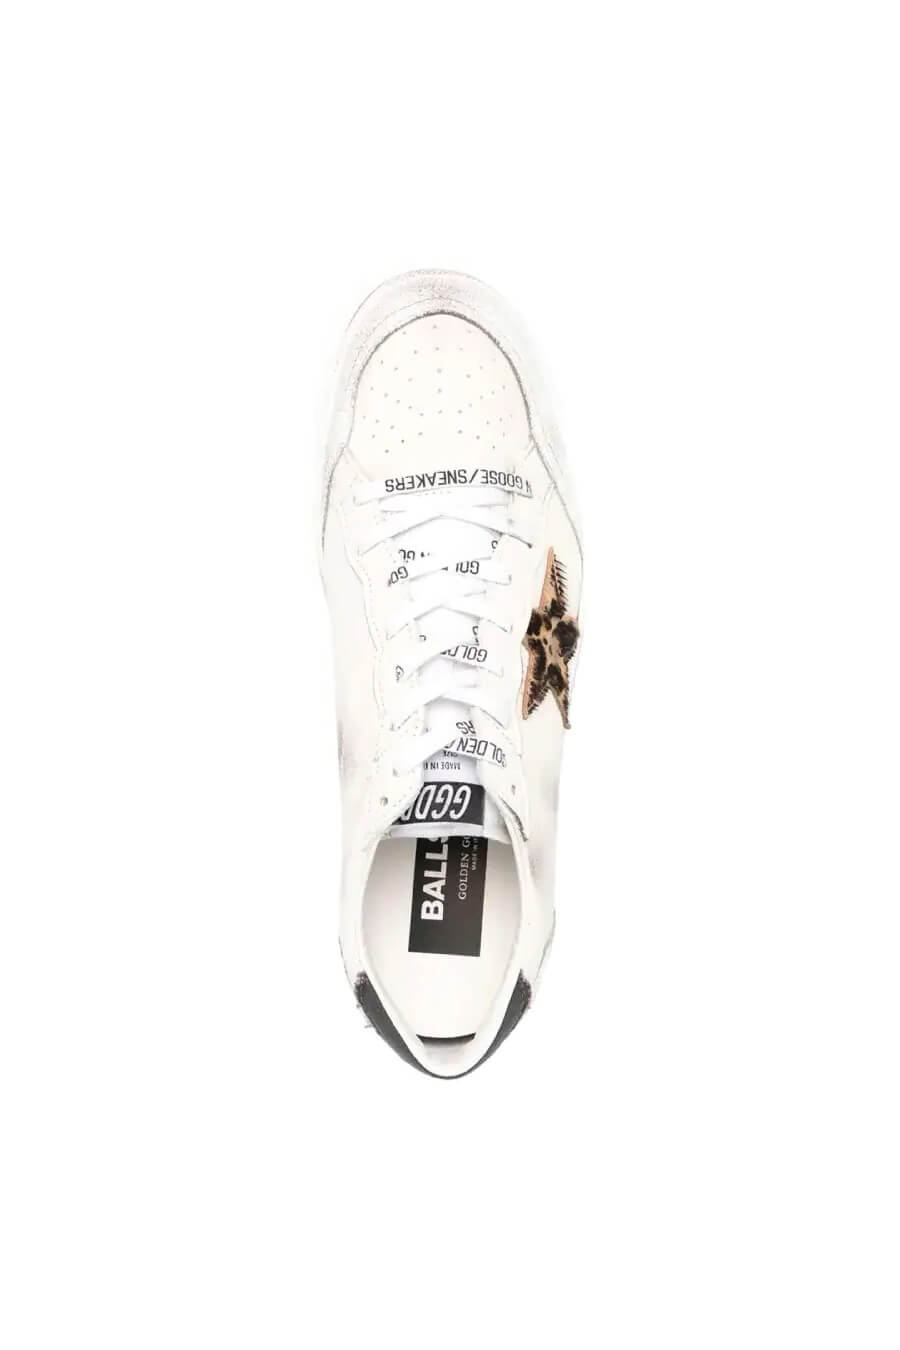 Golden Goose Ball Star Sneaker in White/Beige/Brown/Black available at The New Trend